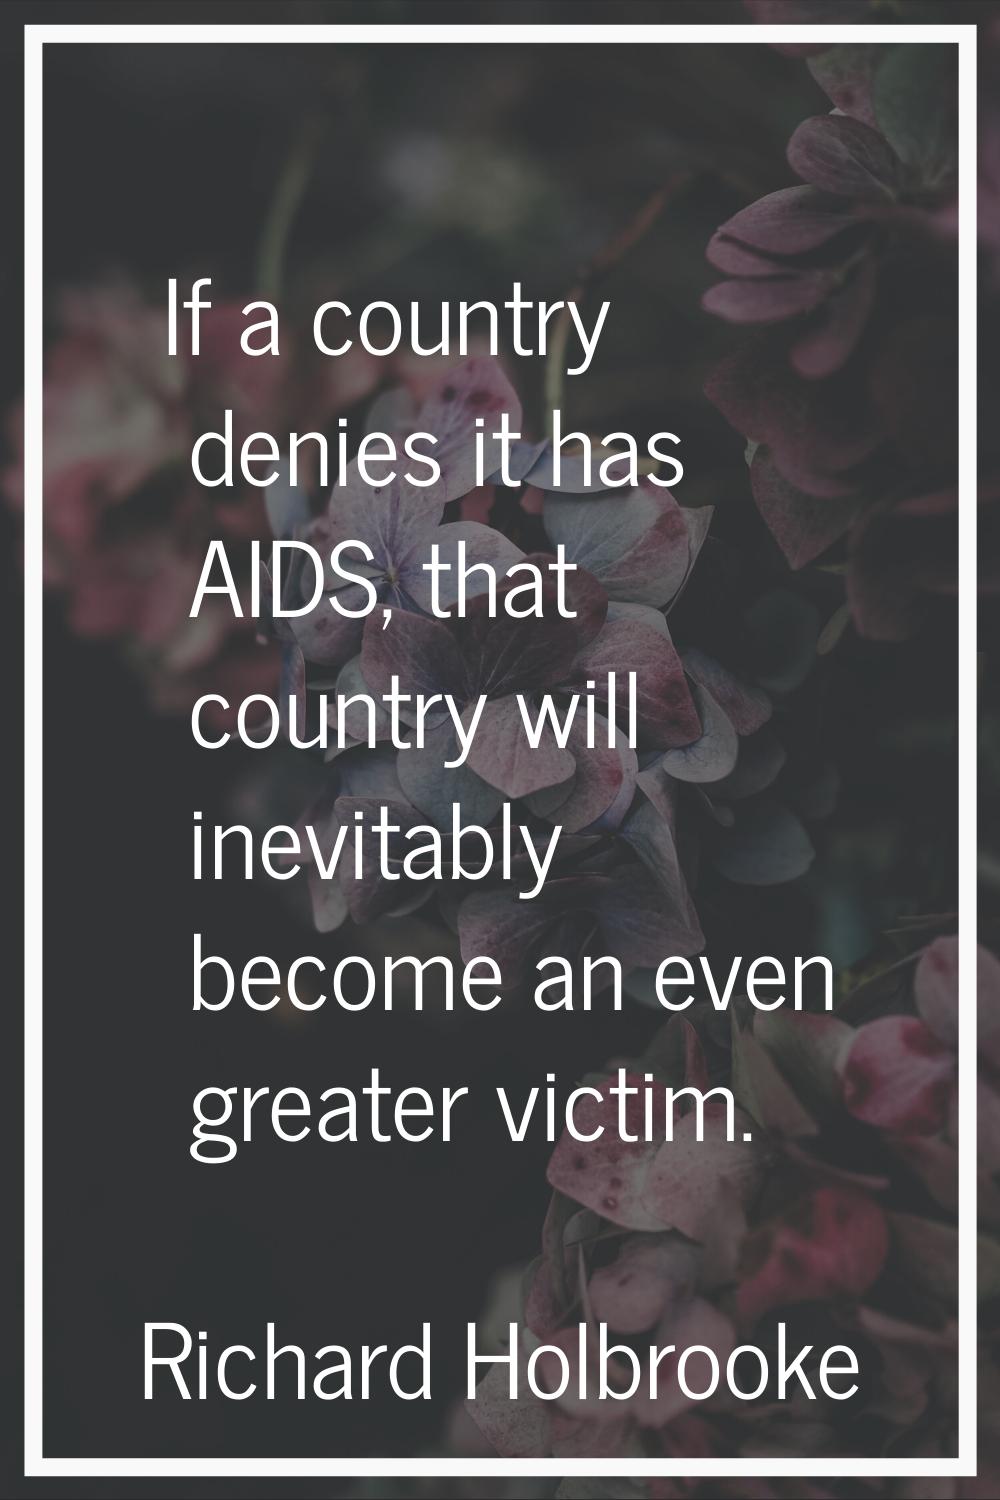 If a country denies it has AIDS, that country will inevitably become an even greater victim.